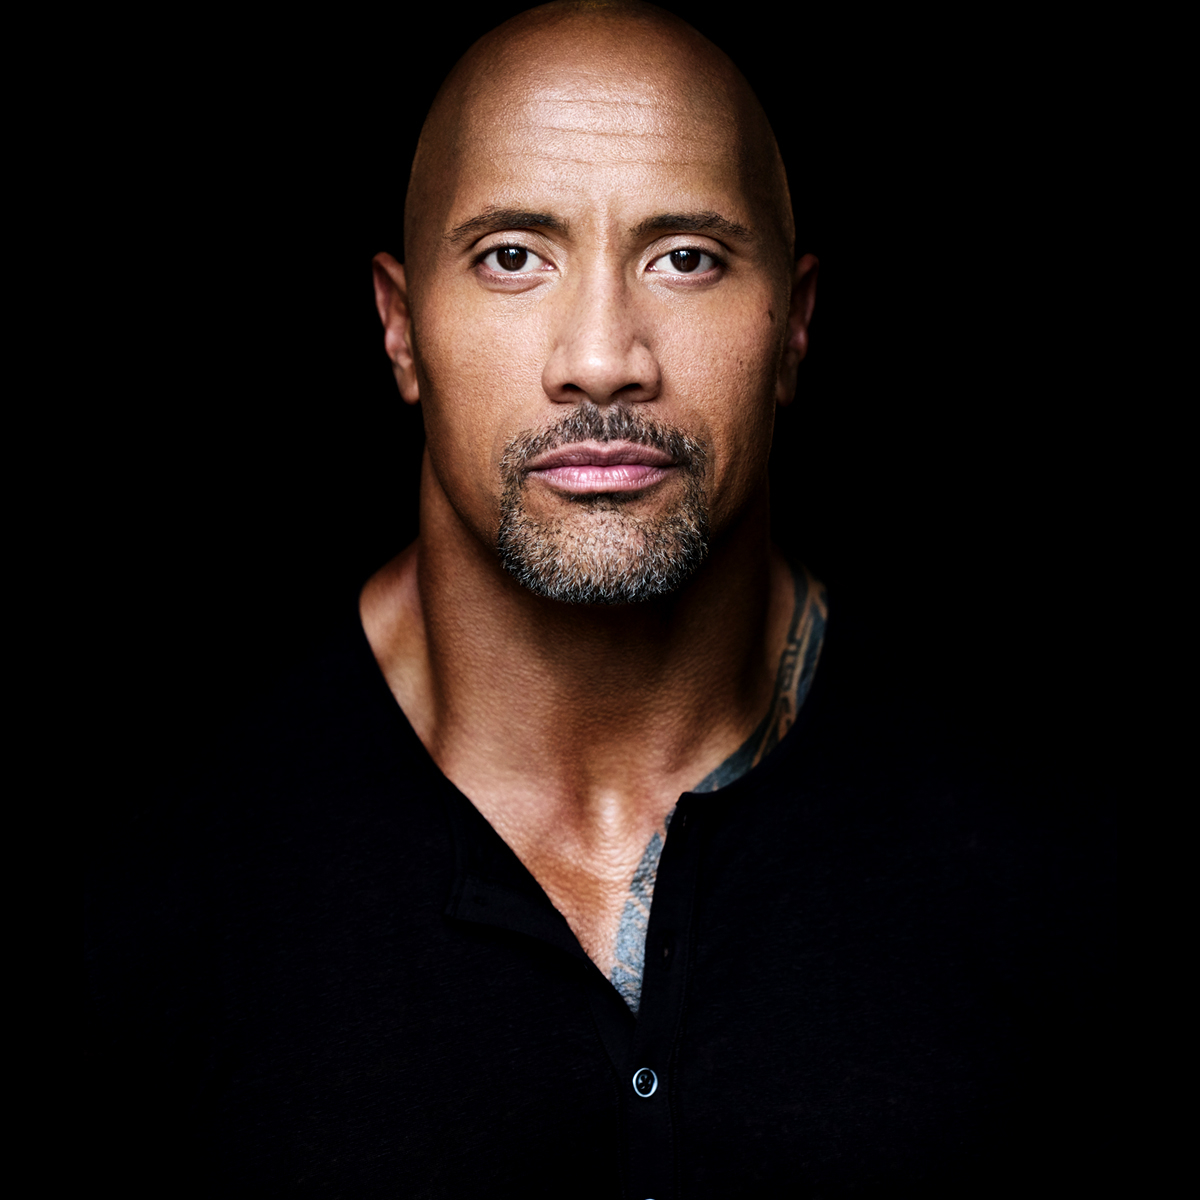 The Profile Dossier: Dwayne 'The Rock' Johnson, the Most Likable